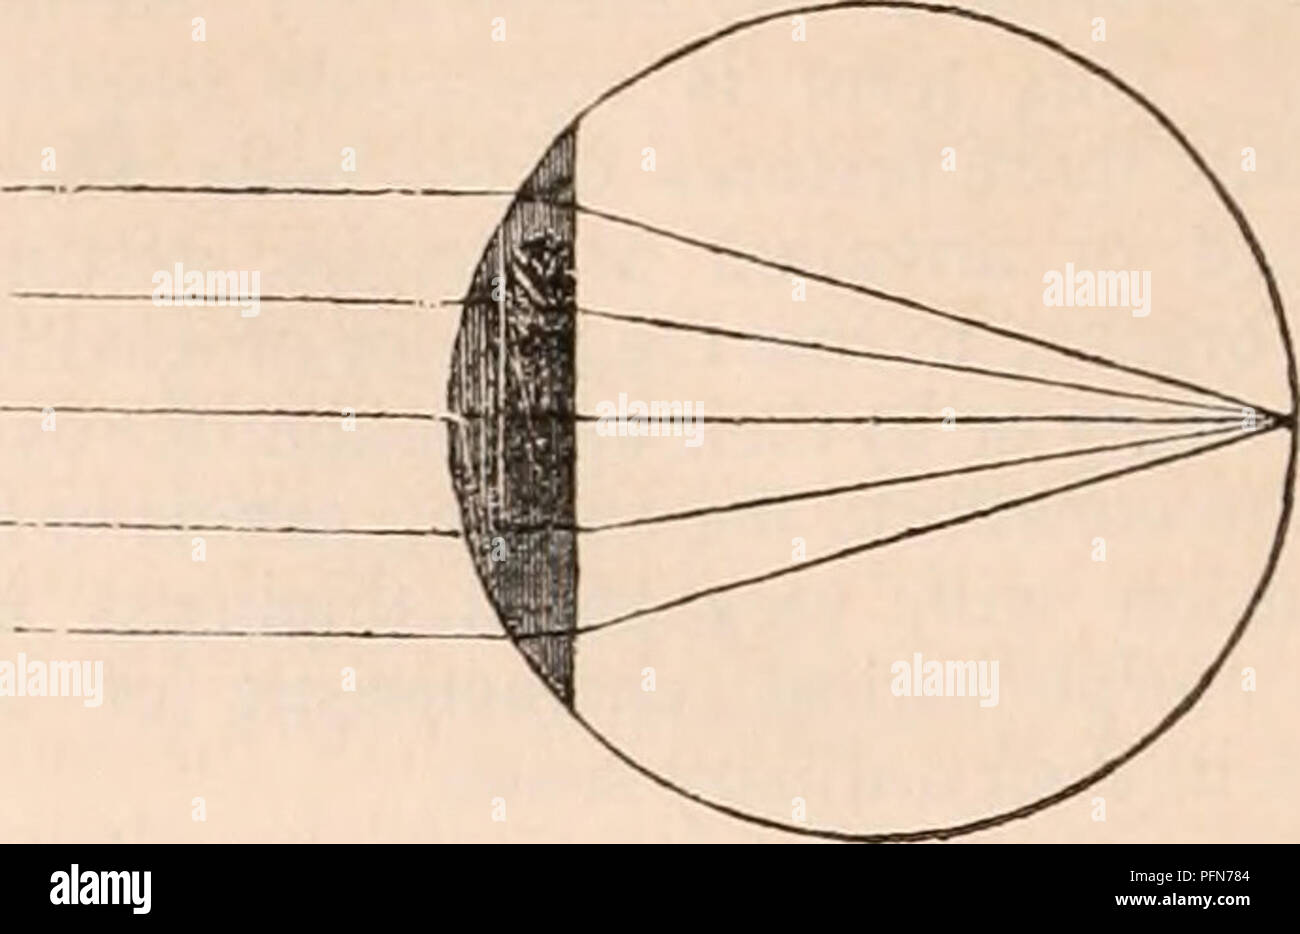 . The cyclopædia of anatomy and physiology. Anatomy; Physiology; Zoology. Parallel rays fulling on a double convex lens brought to a focus in its centre ; and rays diverging from Mich a point rendered parallel. Fig. 147.. Parallel rays falling on a plano-convex lens brottght to a focus at the distance of its diameter, arid vice versa. if a double convex lens will bring parallel rays to a focus in the centre of its sphere of curva- ture, it will on the other hand cause rays to assume a parallel direction, which are diverging from its focus ; so that if a luminous body were placed in that point, Stock Photo